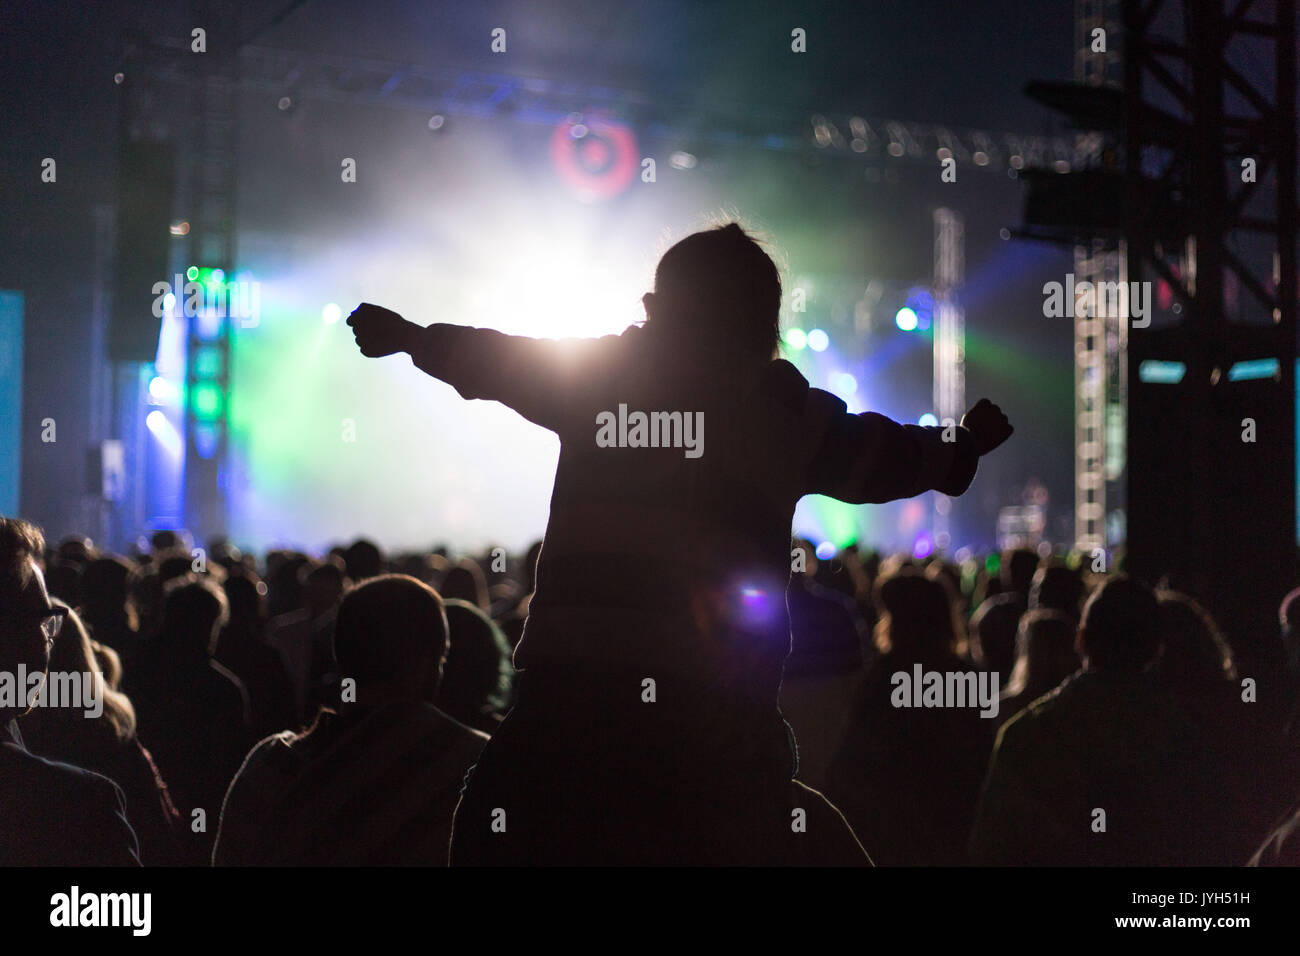 CROWD SCENE DANCING ON SHOULDERS IN SILHOUETTE: People dance wildly on one another's shoulders in silhouette in stage lighting as the crowd in the Far Out Tent during the LIARS set on Day Two of the Green Man music festival in Glanusk Park, Brecon, Wales on 19th August 2017. Credit: Rob Watkins/Alamy Live News Stock Photo